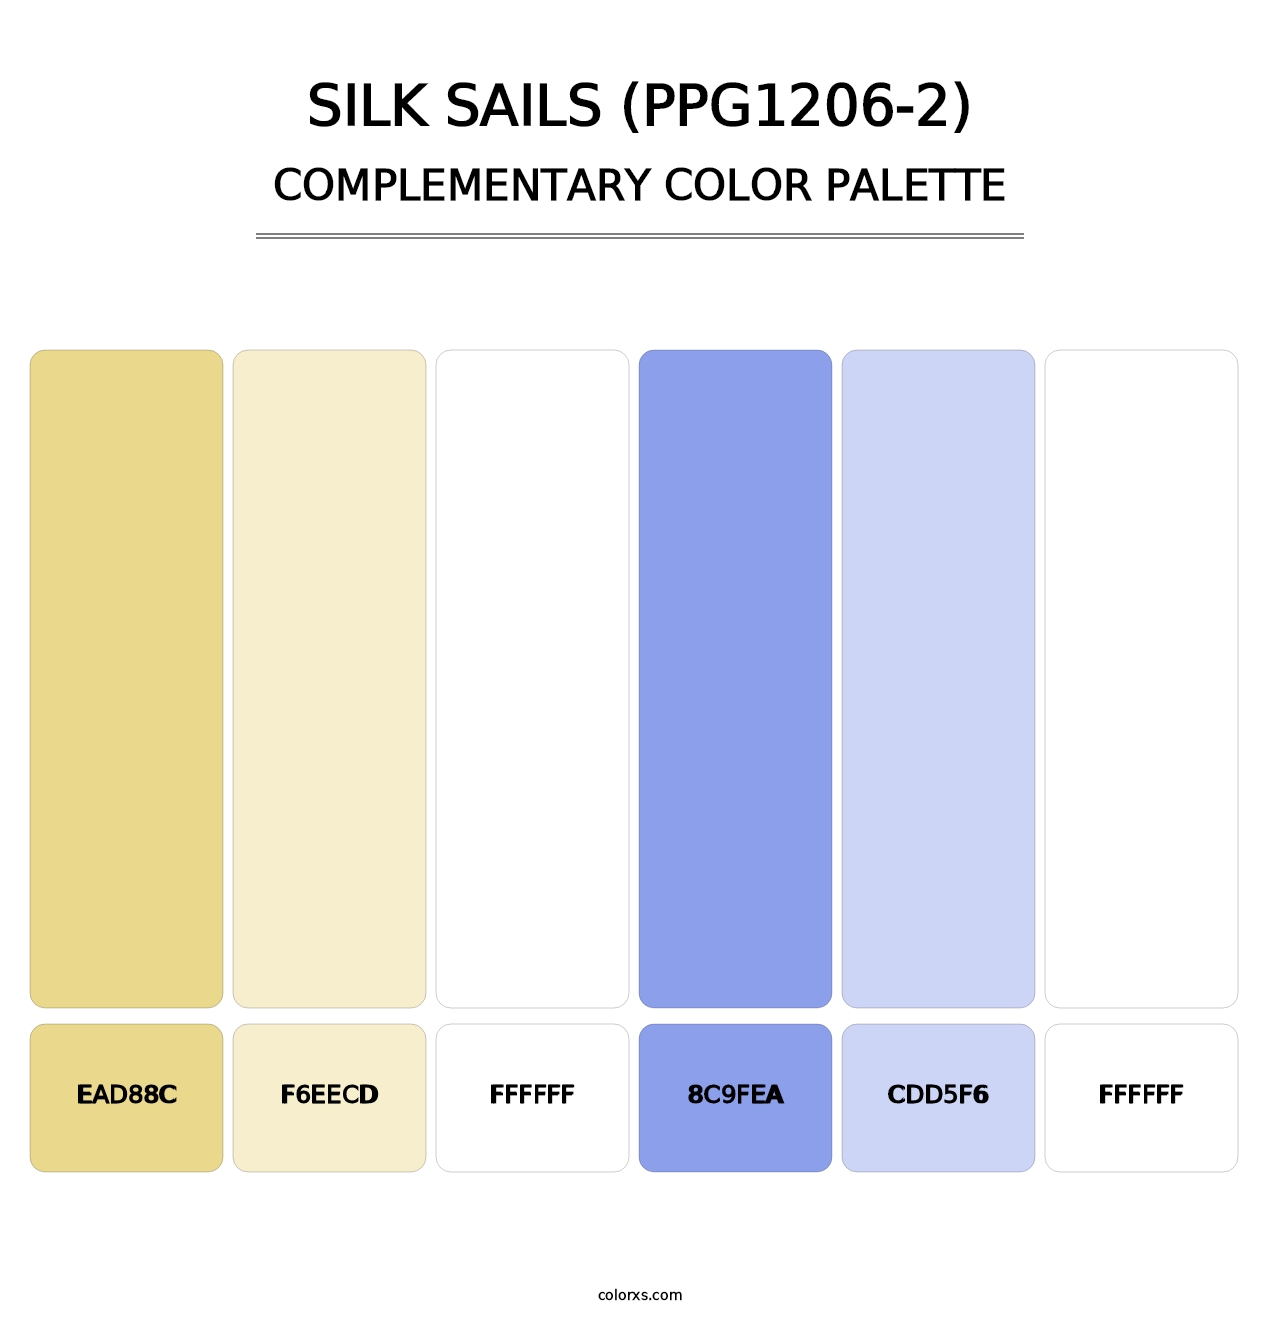 Silk Sails (PPG1206-2) - Complementary Color Palette